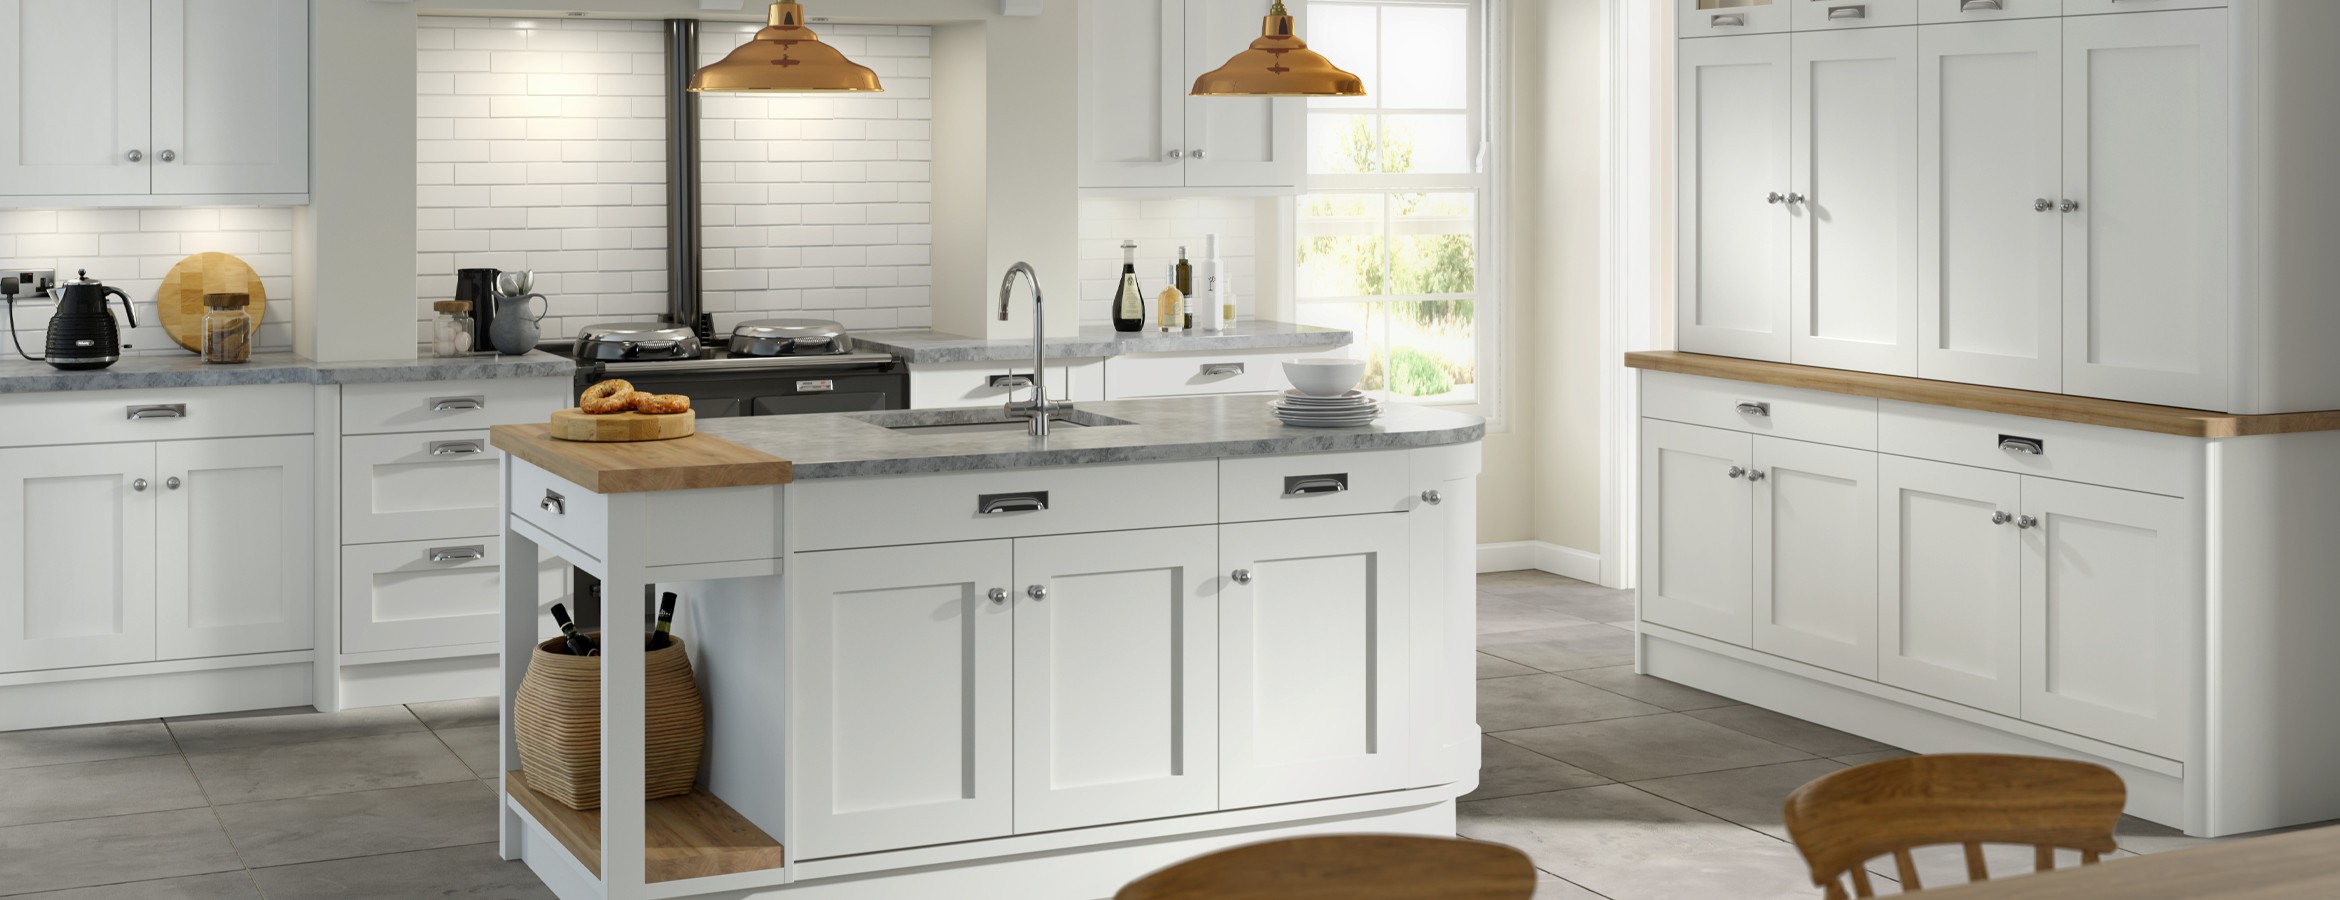 Regency Kitchens Modern Traditional And Adapted Kitchens And Bathrooms In Shropshire Staffordshire And The Cheshire Area